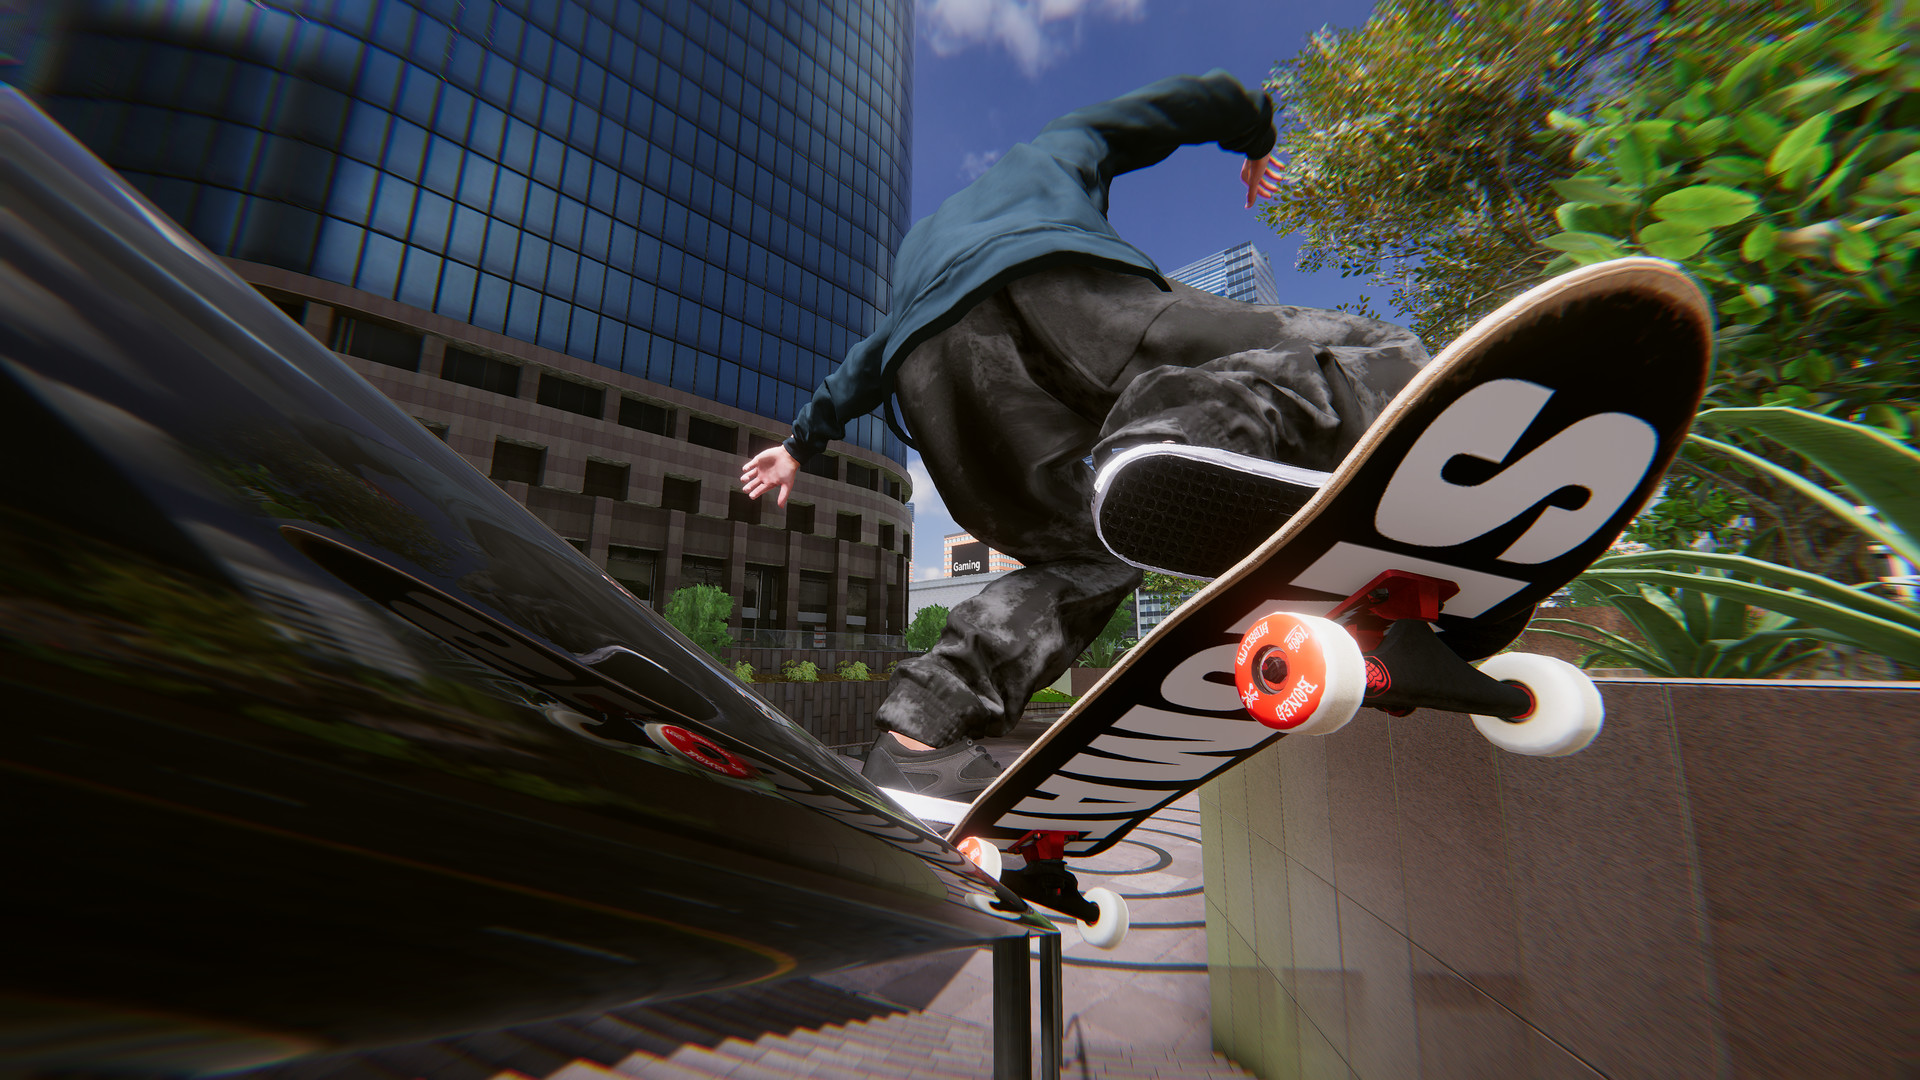 Skate 4 Now Titled 'Skate', Will Be Free to Play